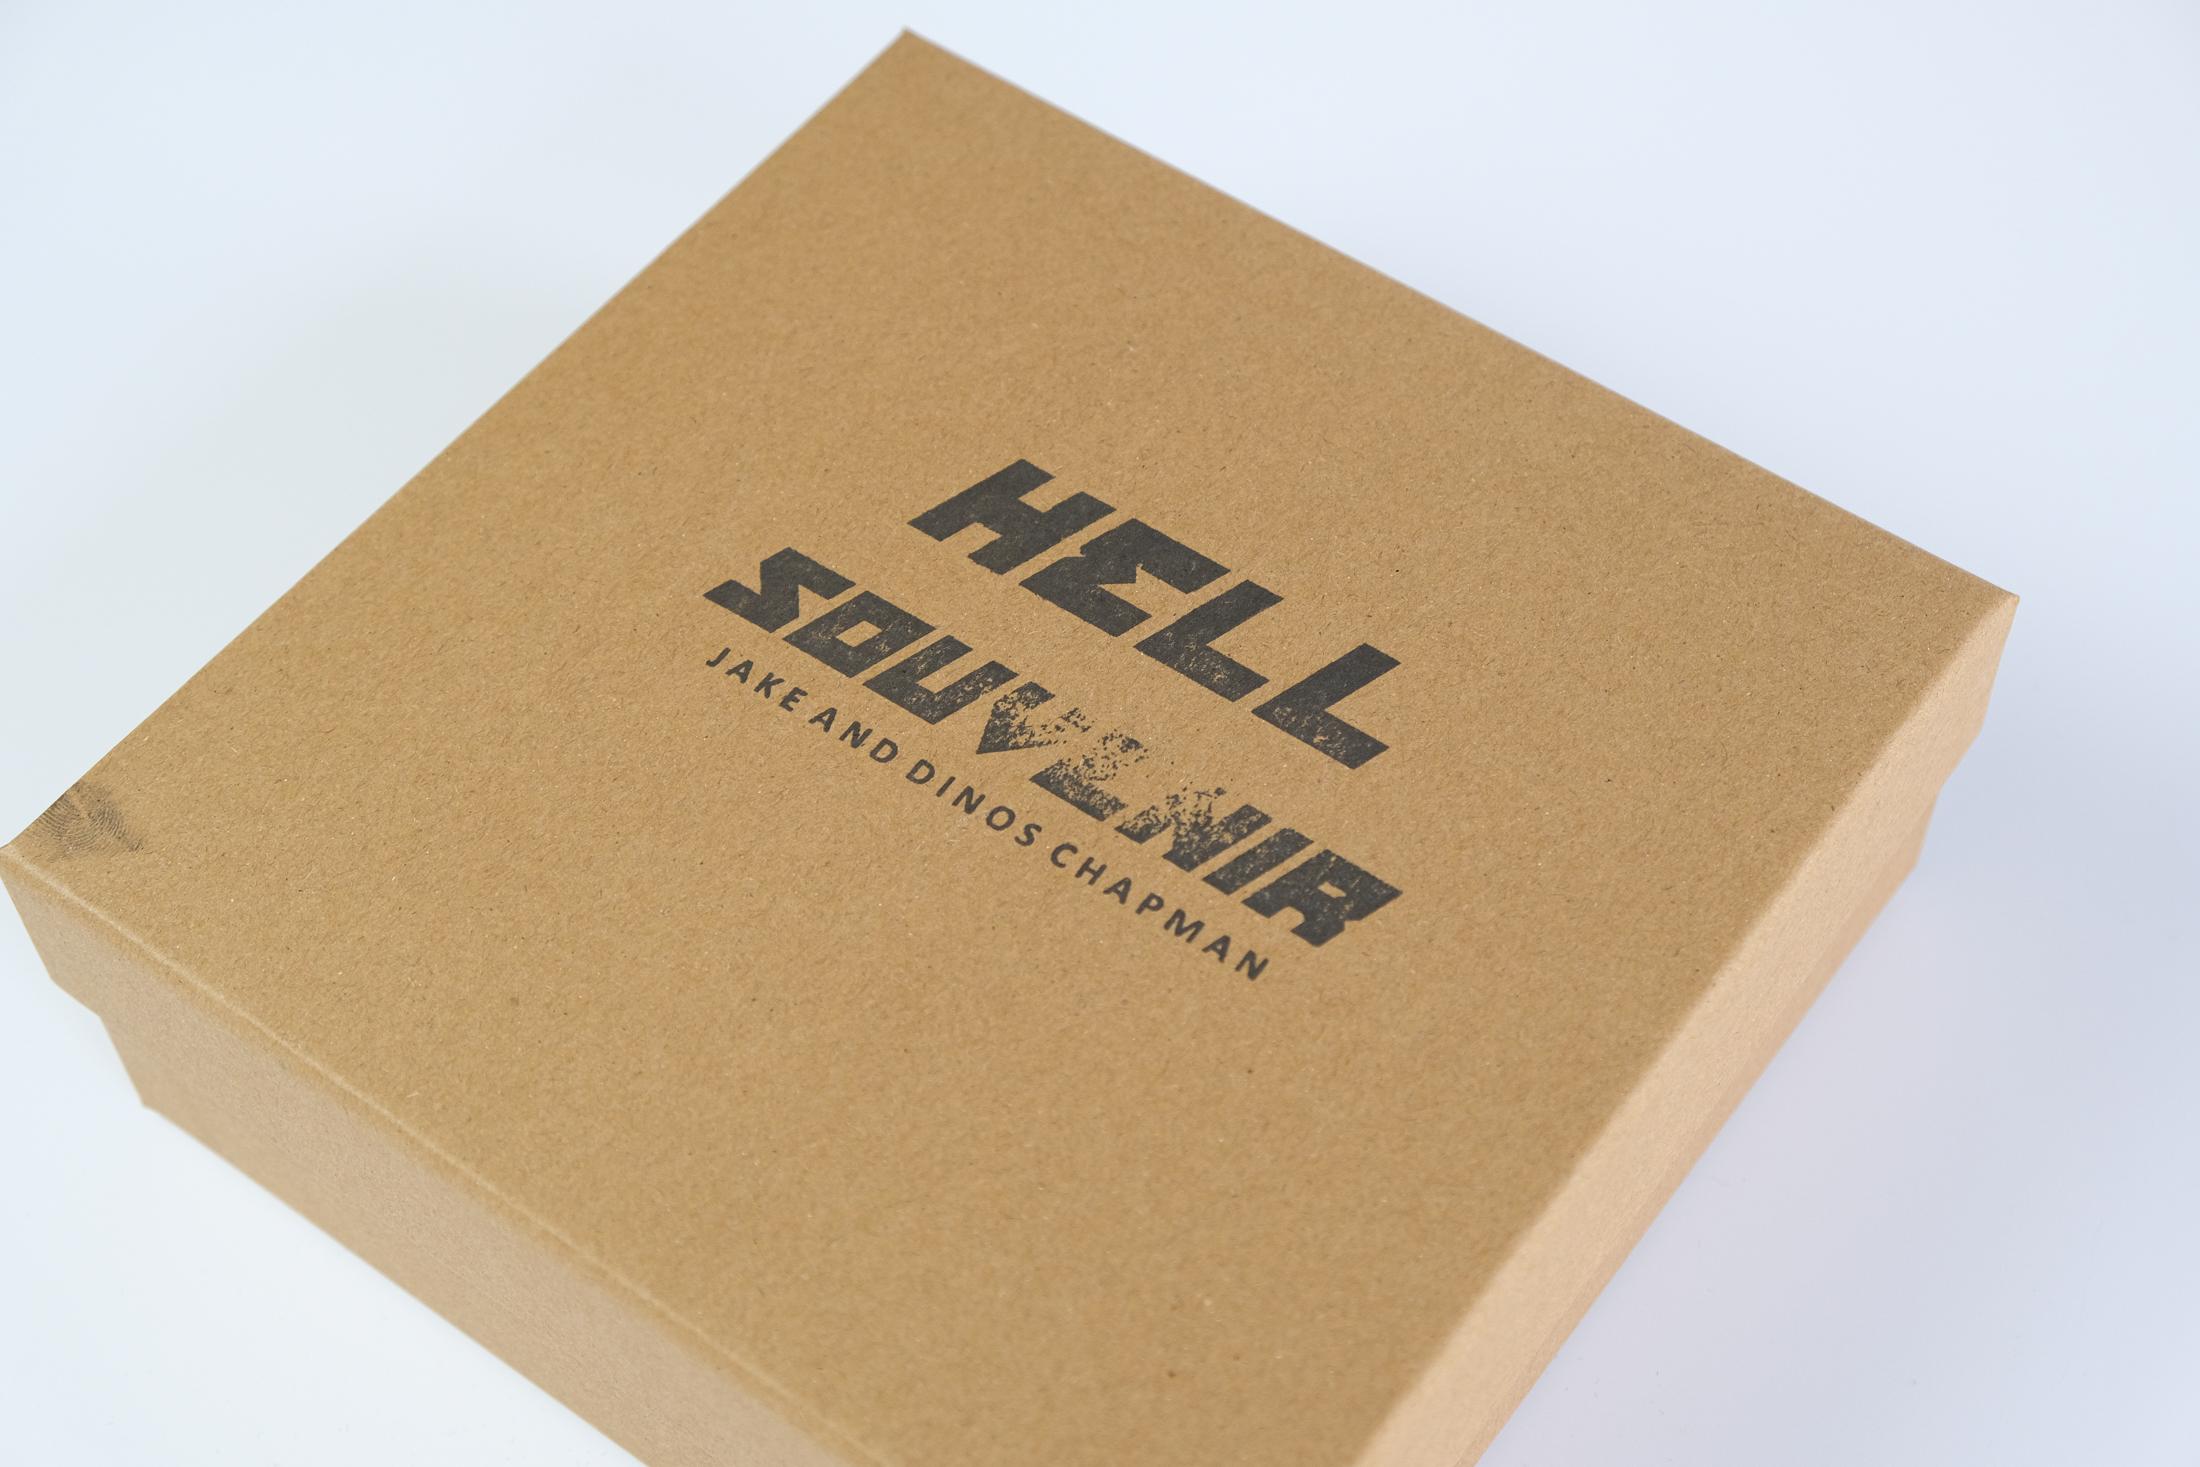 'Hell Souvenir' figures By Jake and Dinos Chapman, 2022 For Sale 8